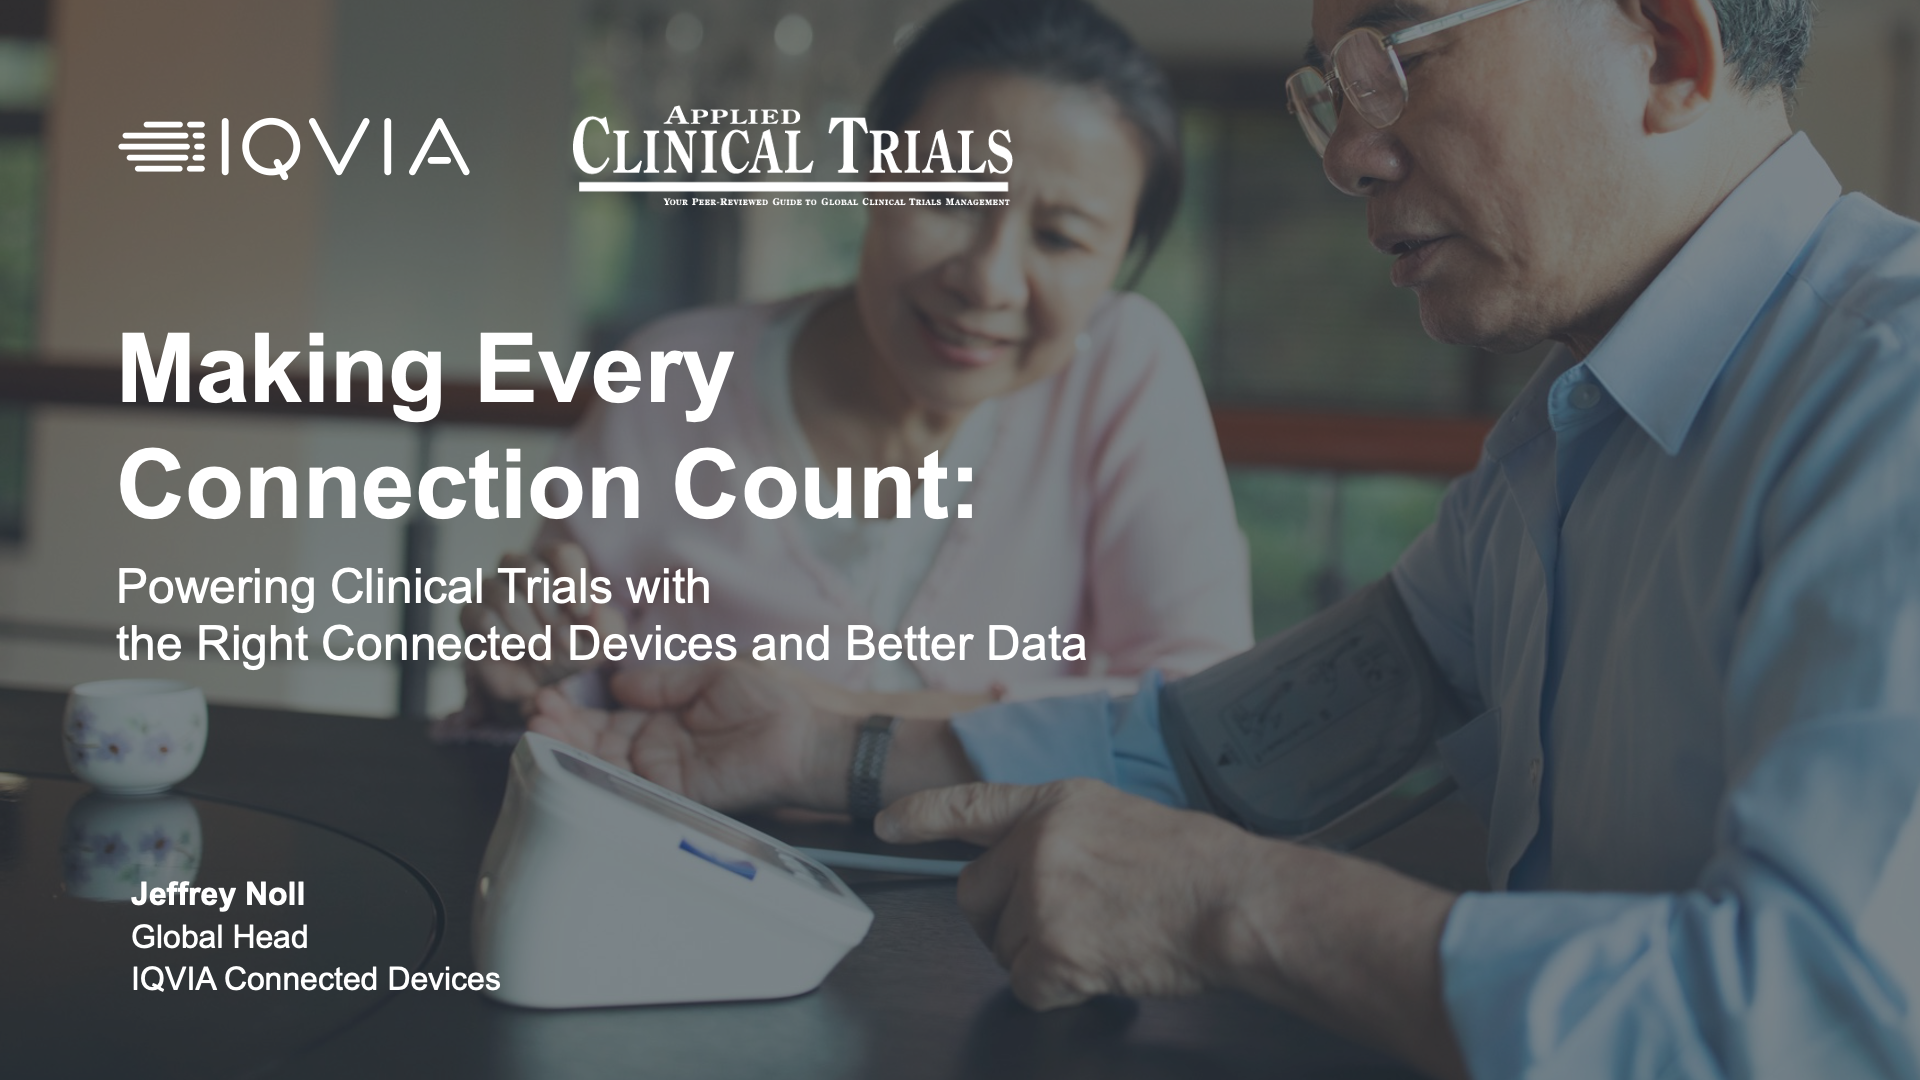 Making Every Connection Count-Powering Clinical Trials with the Right Connected Devices and Better Data